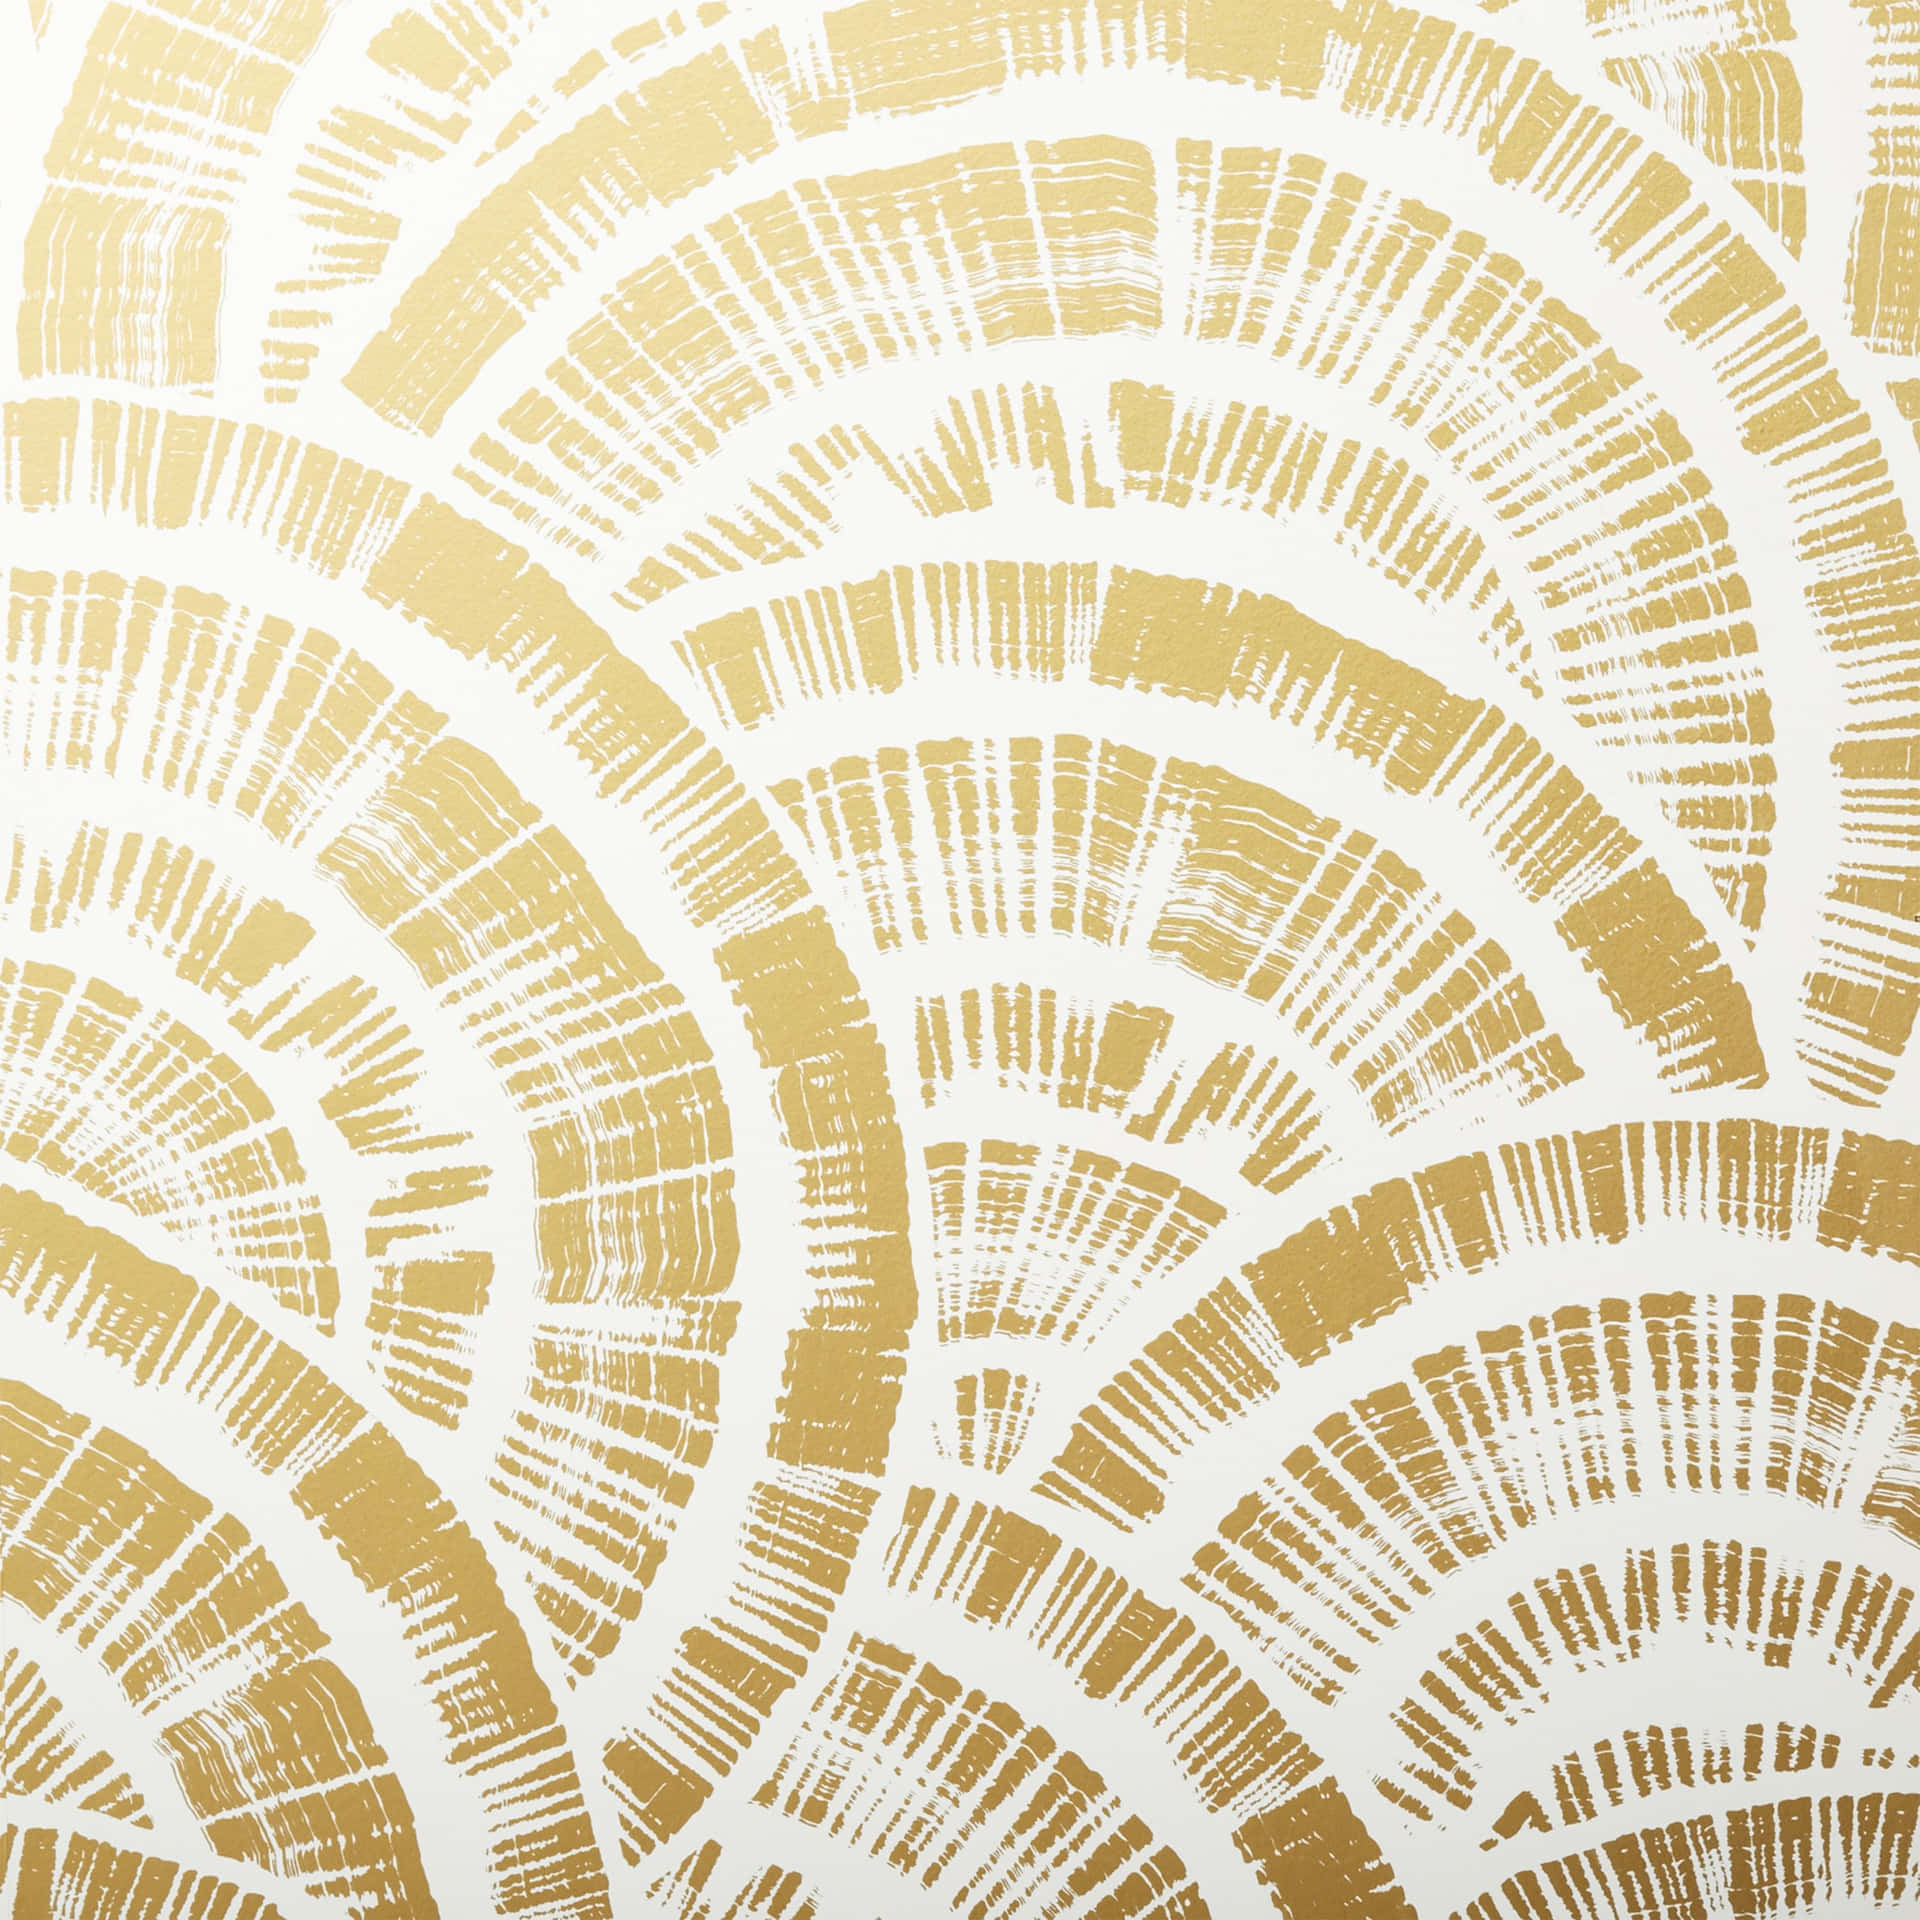 Round Shapes Of White And Gold Metallic Background